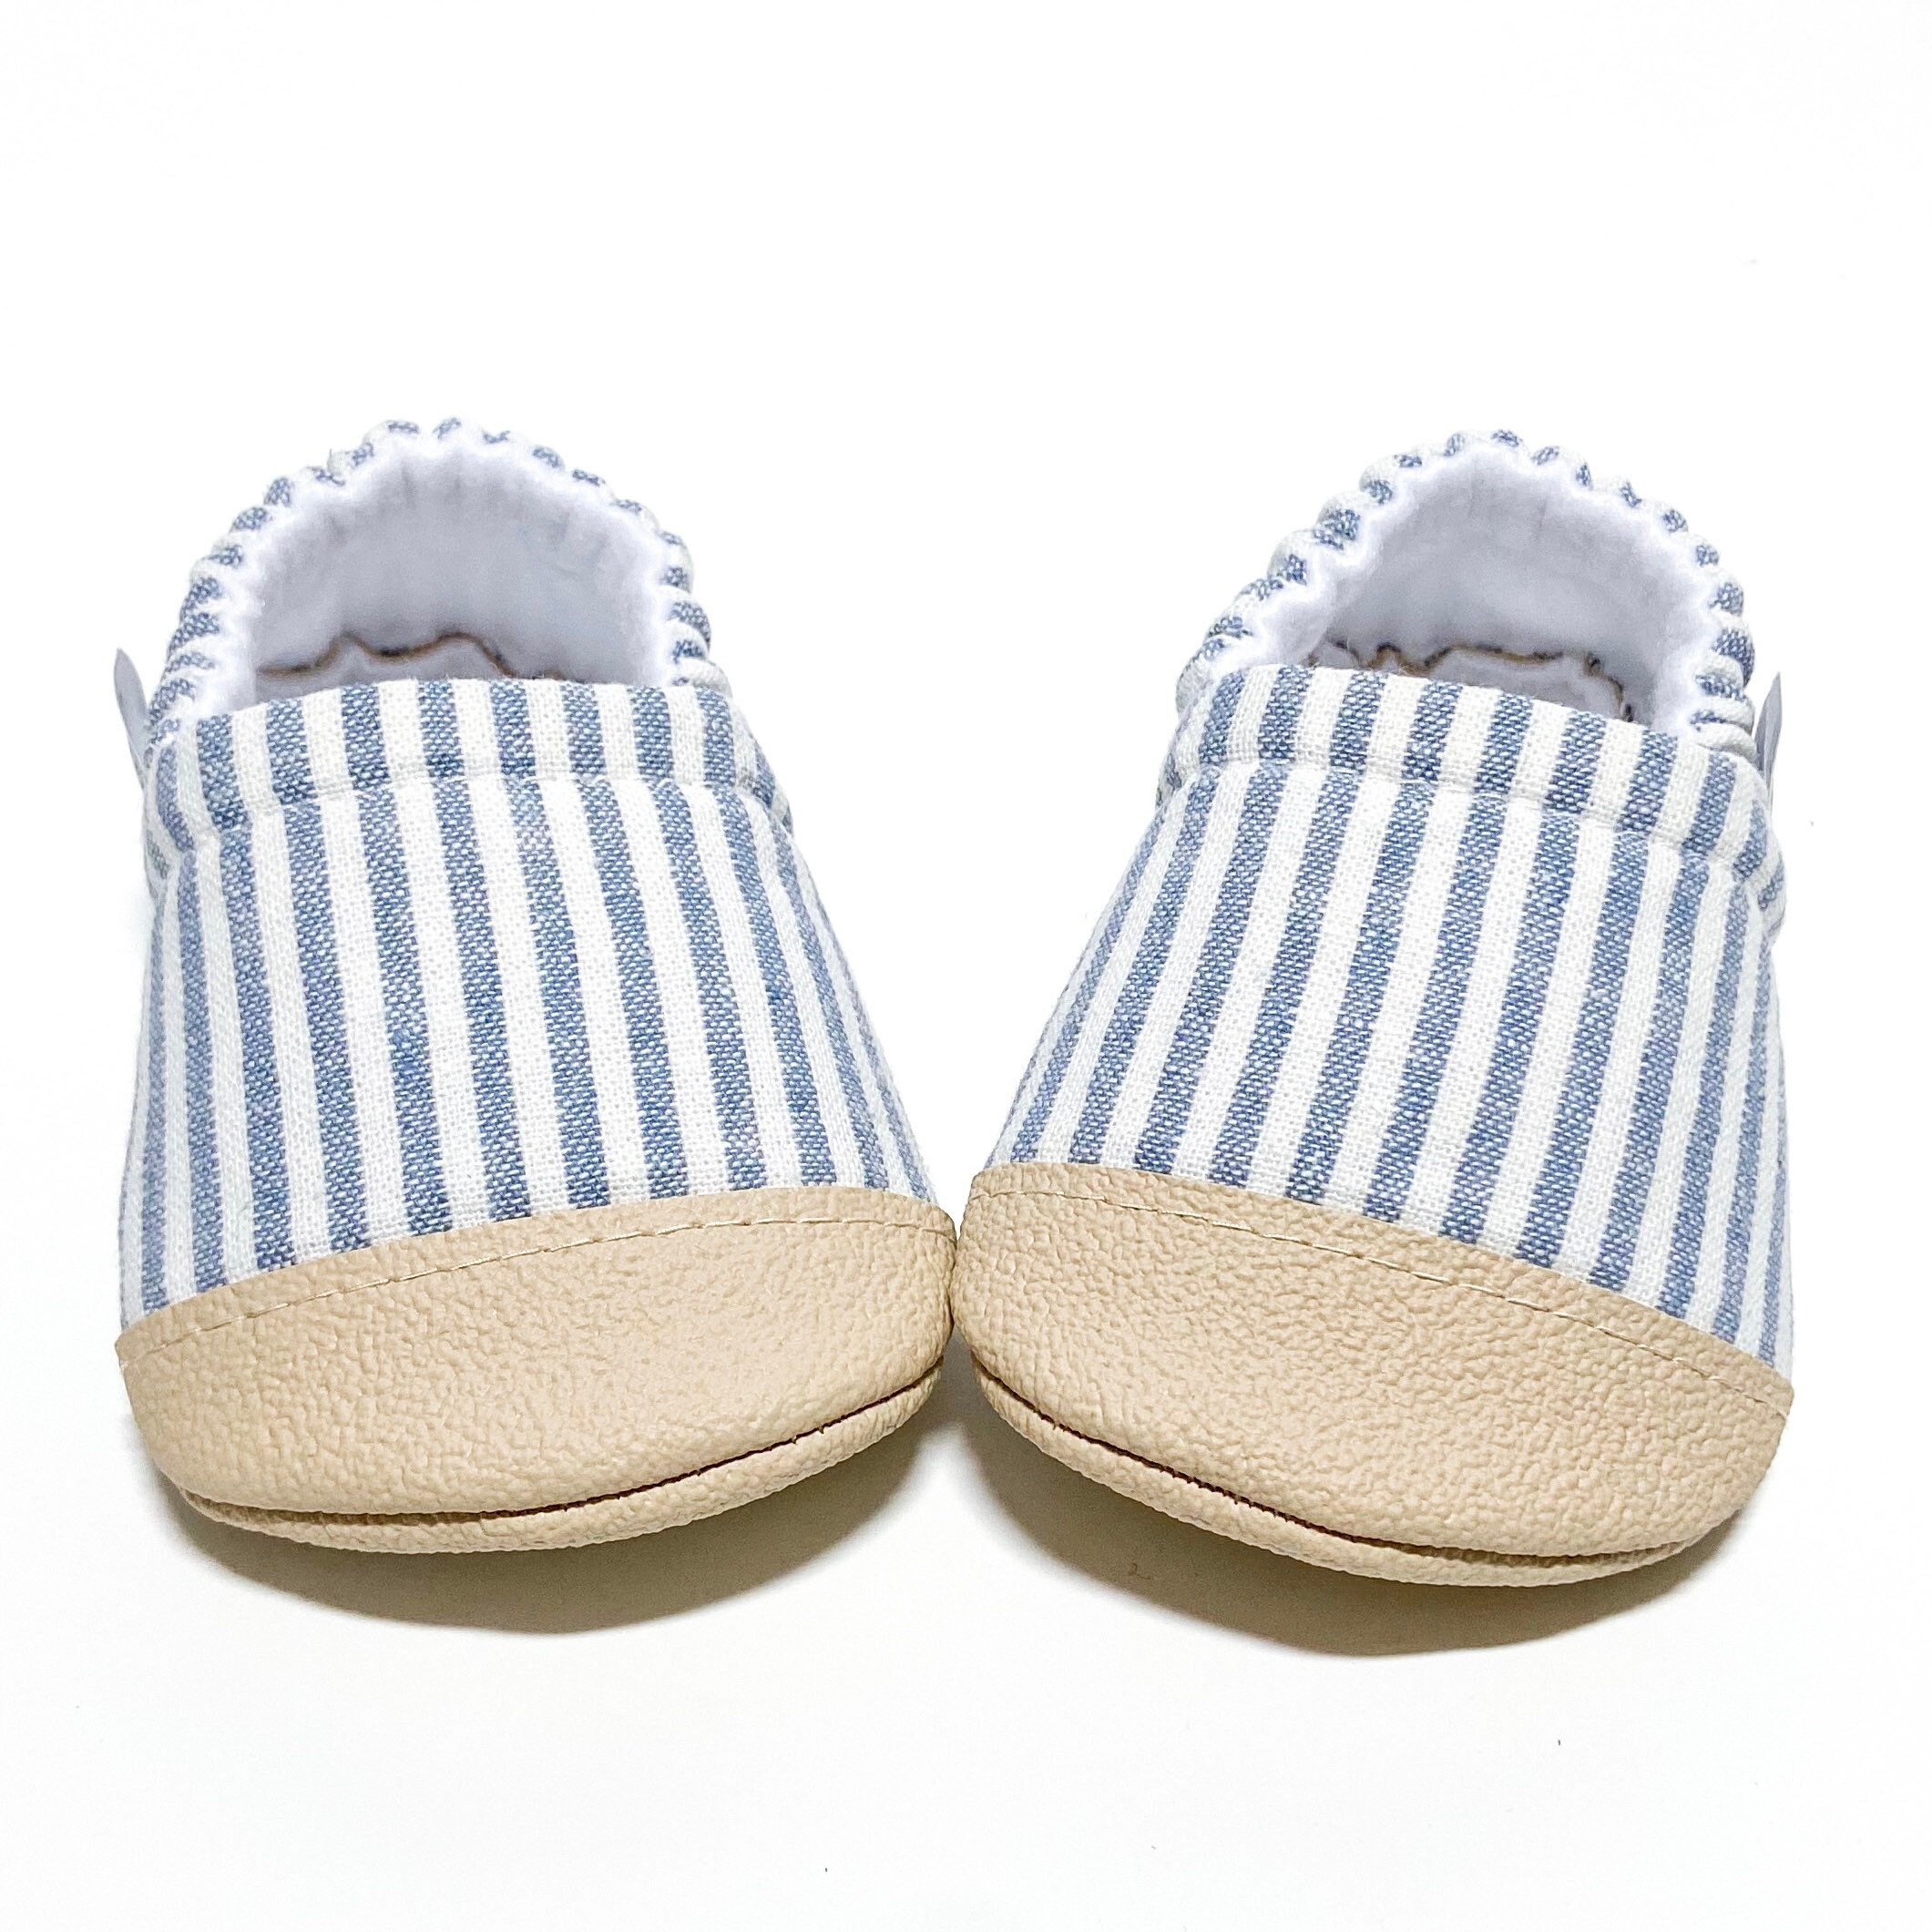 Blue Pinstripe Linen Blend Baby Booties, Slippers, Crib Shoes, Soft Sole, Moccasins, Shoes